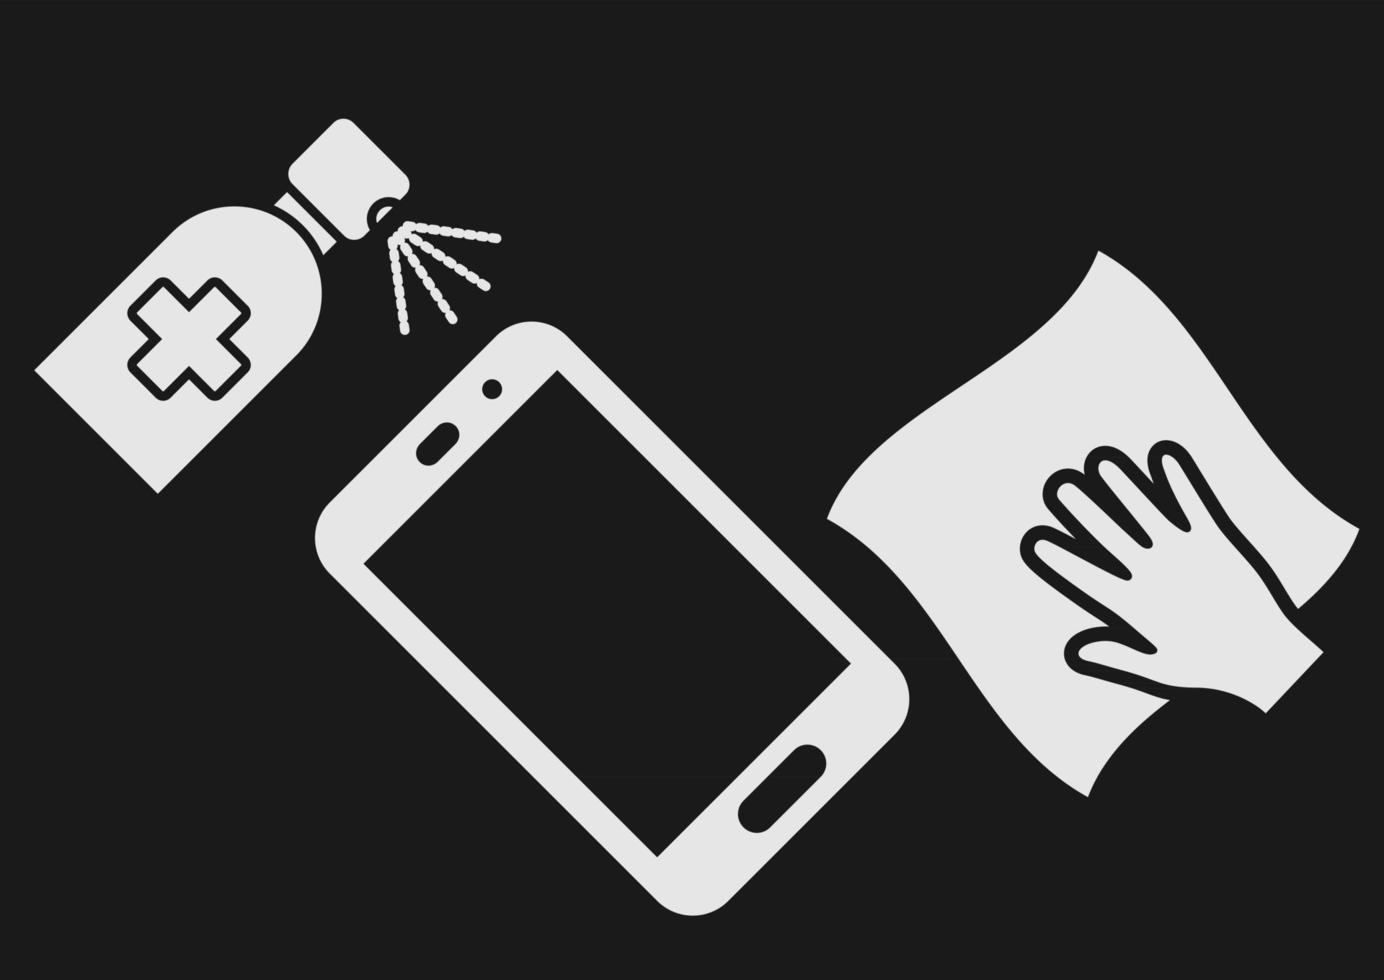 Smartphone disinfection icon. Wiping mobile phone display using cleaning cloth. Disinfection smartphone using cleaning napkin and disinfectant. Hygiene and virus pandemic health. Vector